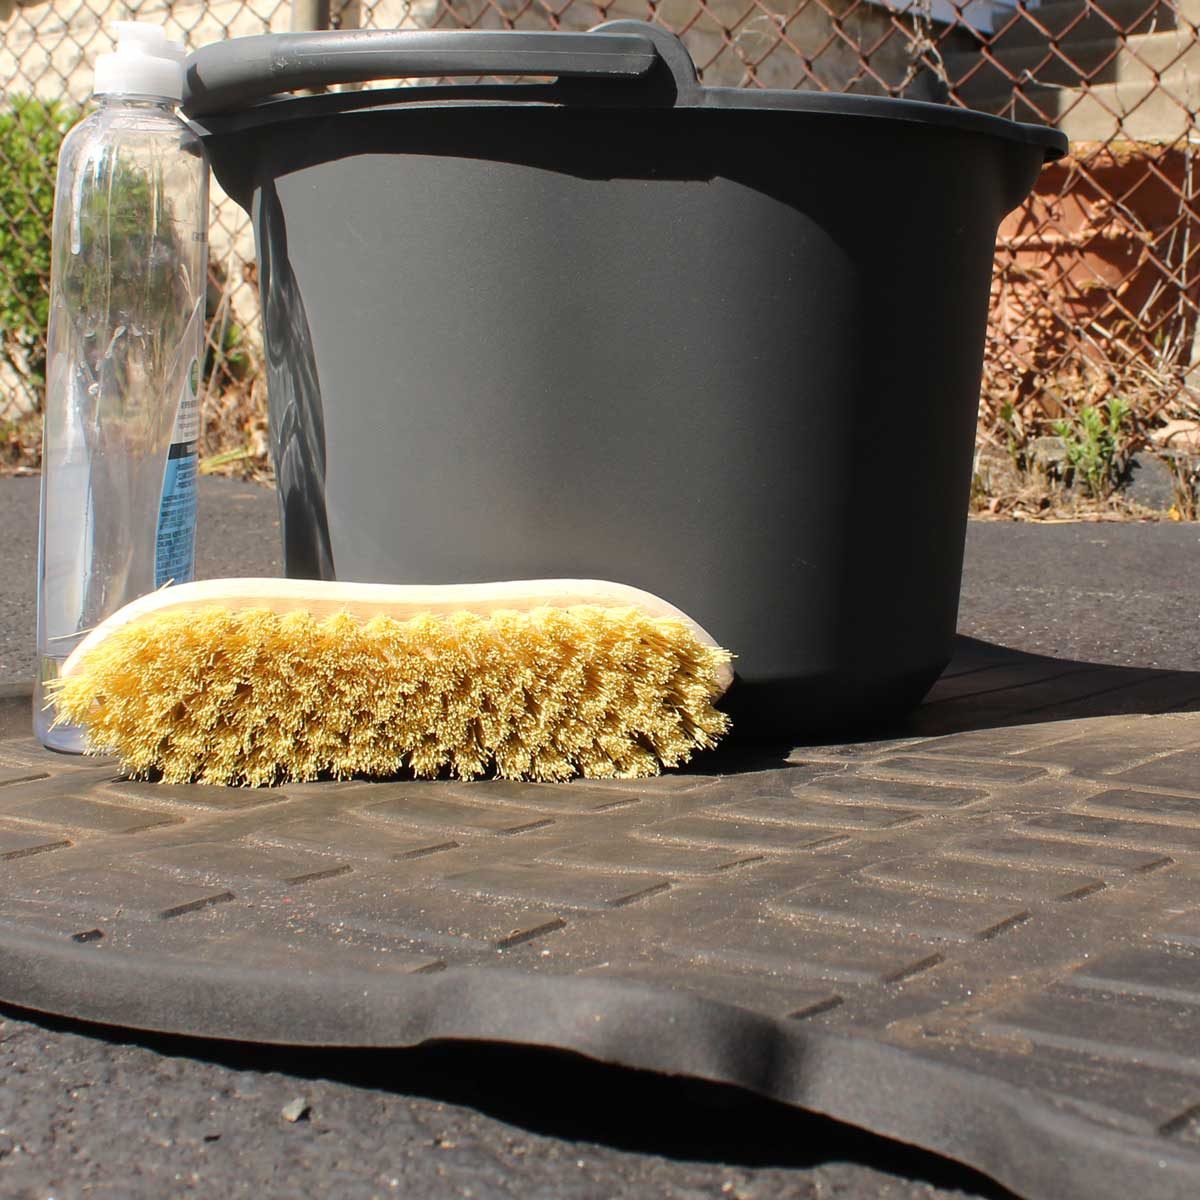 This is the easiest method that I found to clean rubber floor mats